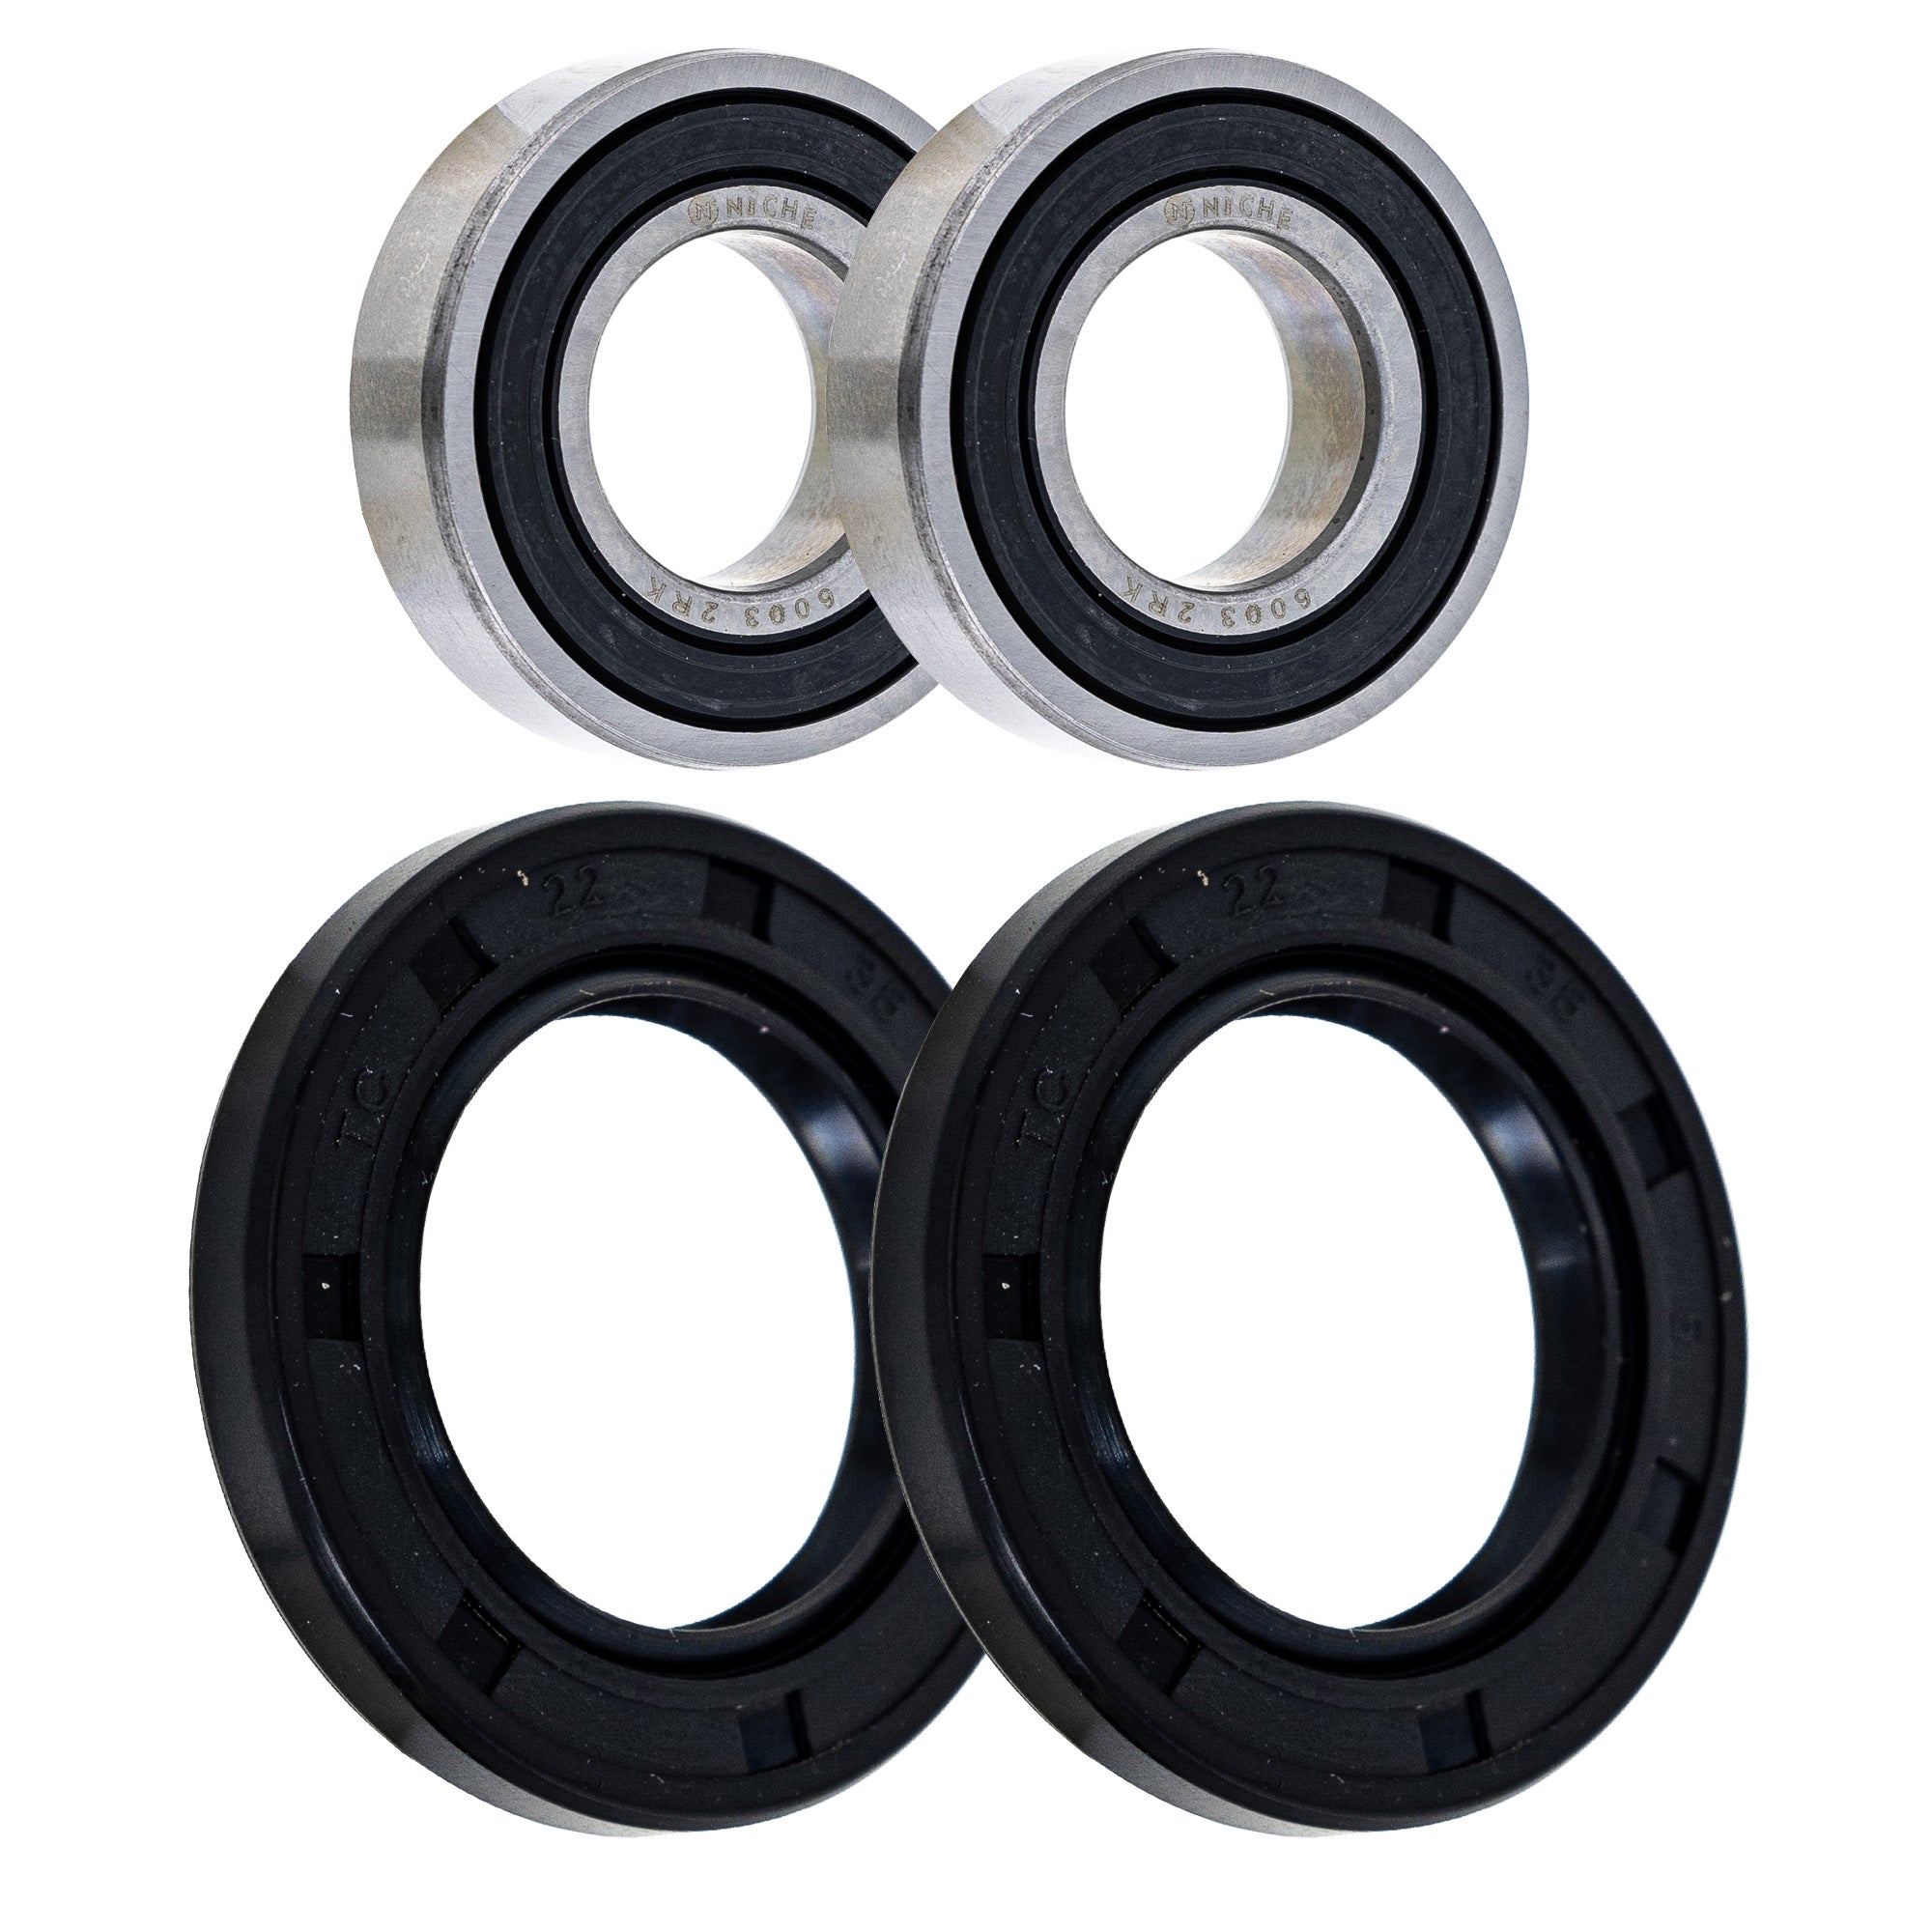 Wheel Bearing Seal Kit for zOTHER YZ250 YZ125 WR250 NICHE MK1009098